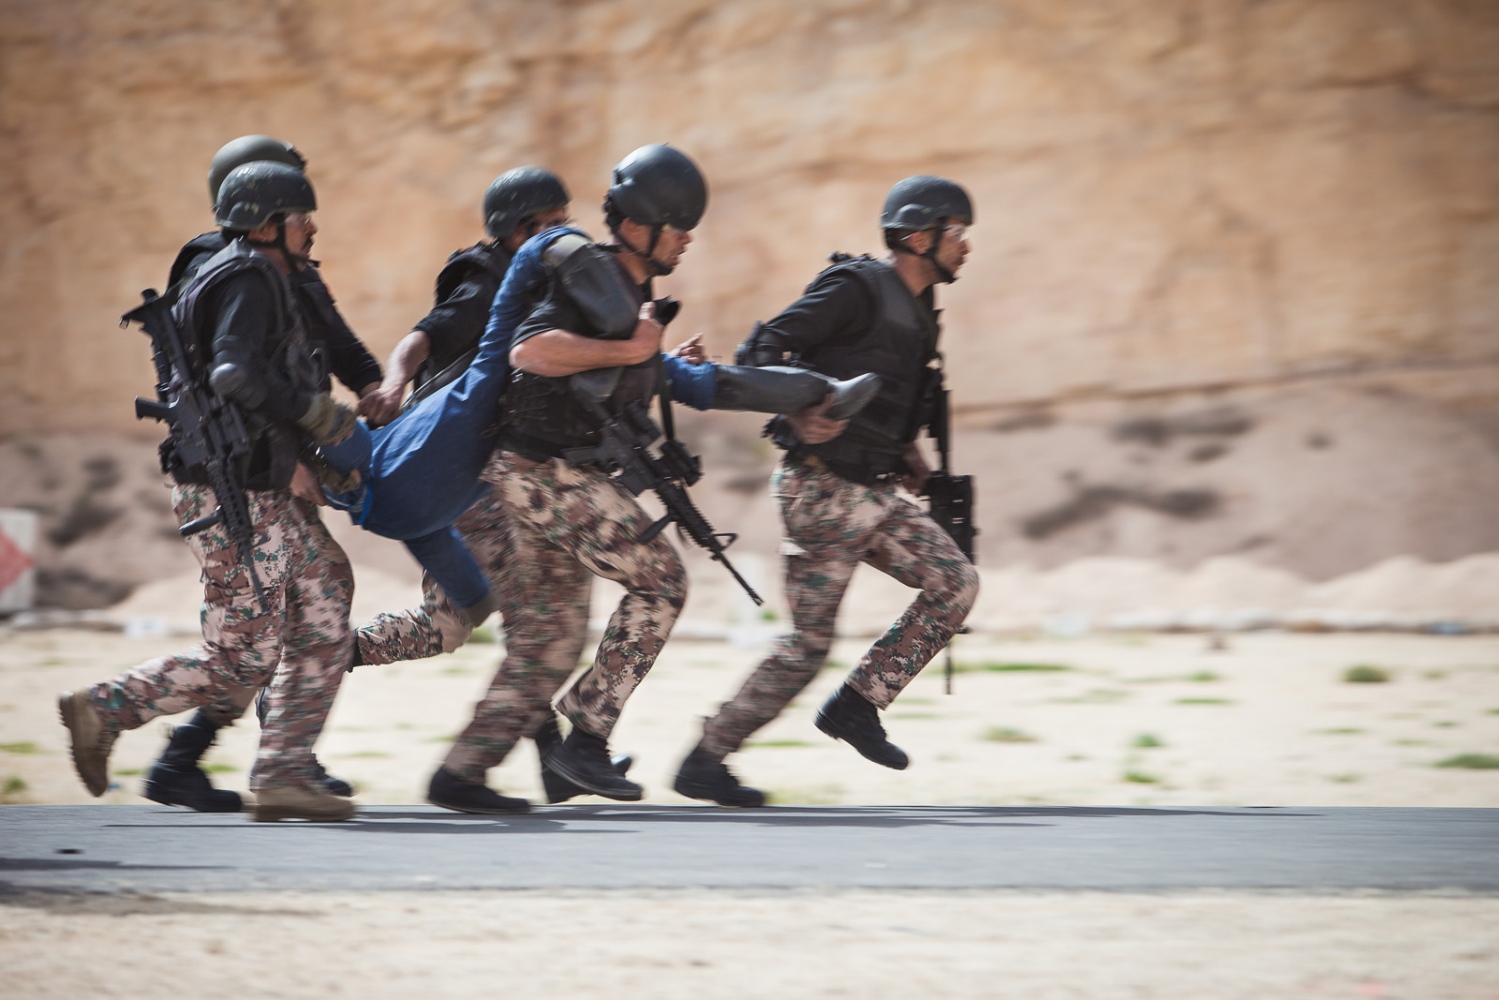  The Jordan team participates in the hostage rescue exercise at the seventh annual Warrior Competition at the King Abdullah II Special Operations Training Center near Amman, Jordan, on April 20, 2015. 